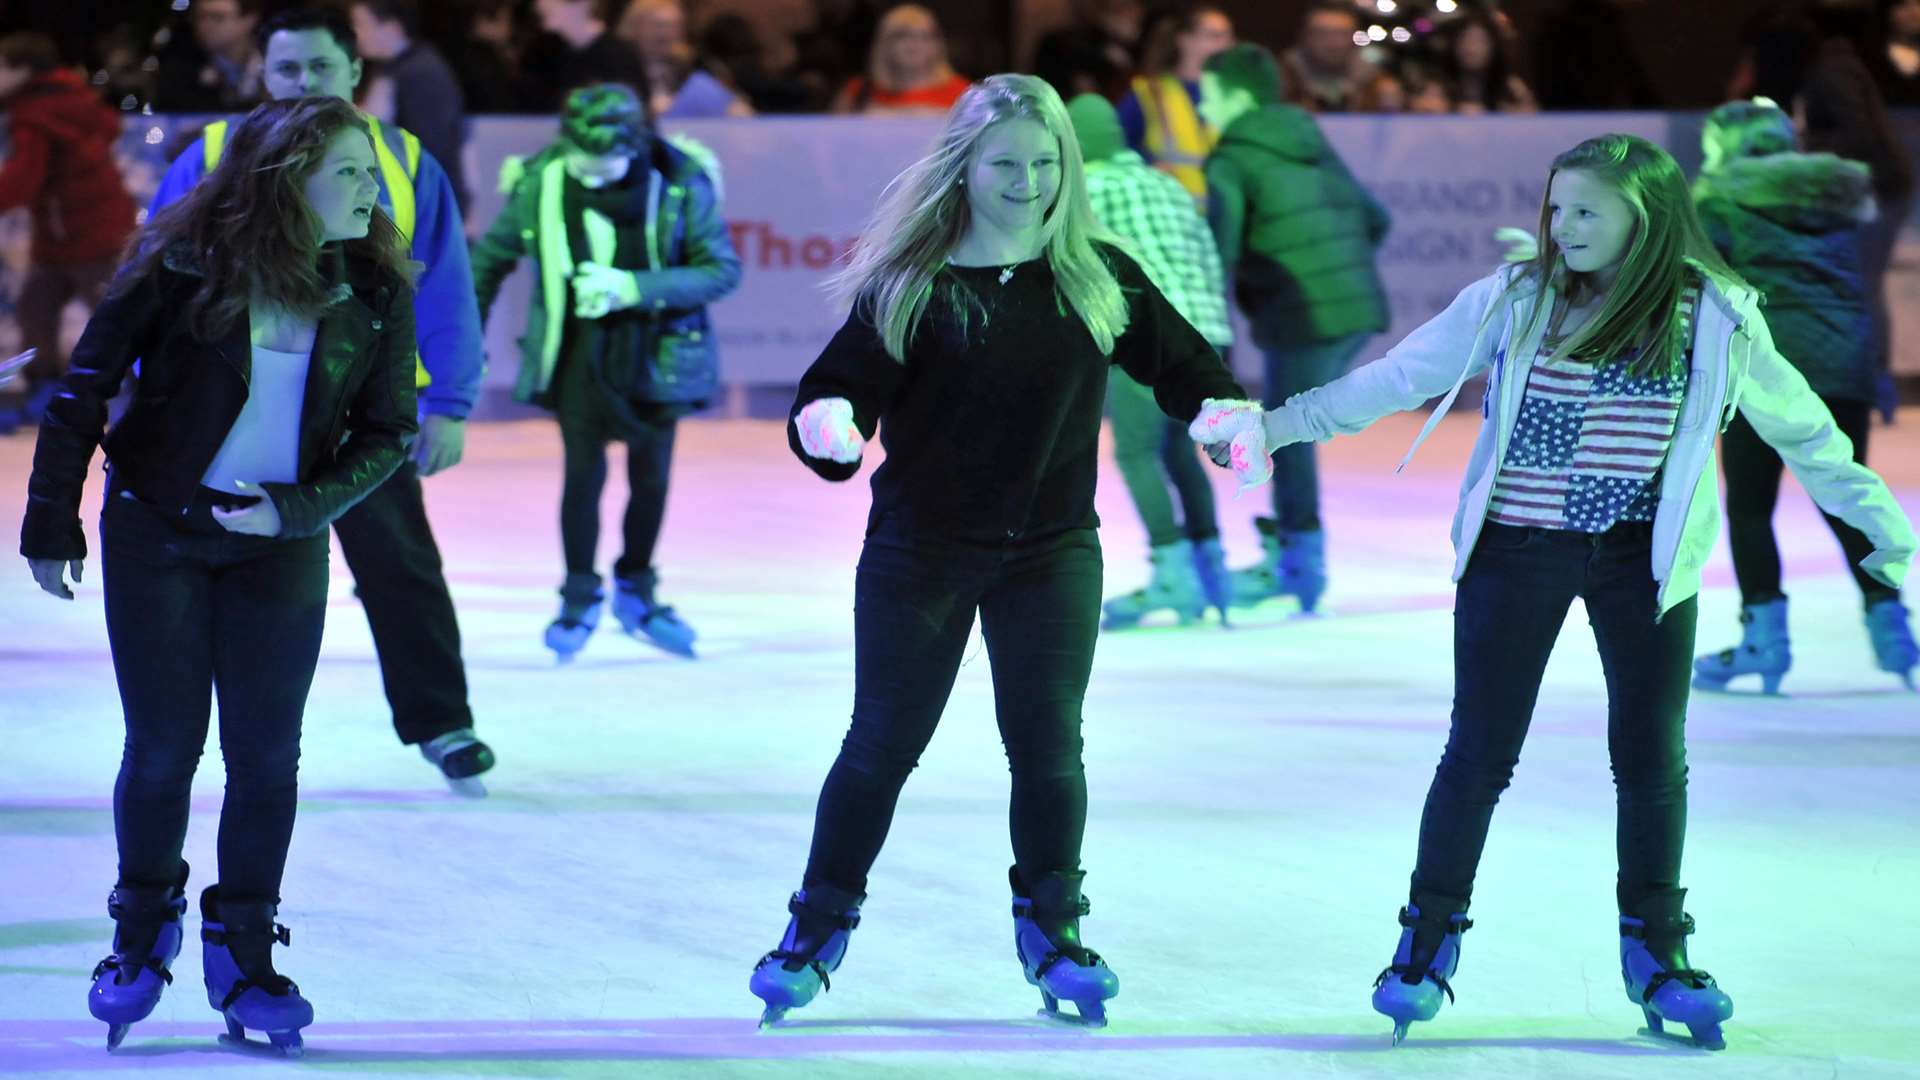 There's also ice skating to be enjoyed at Bluewater